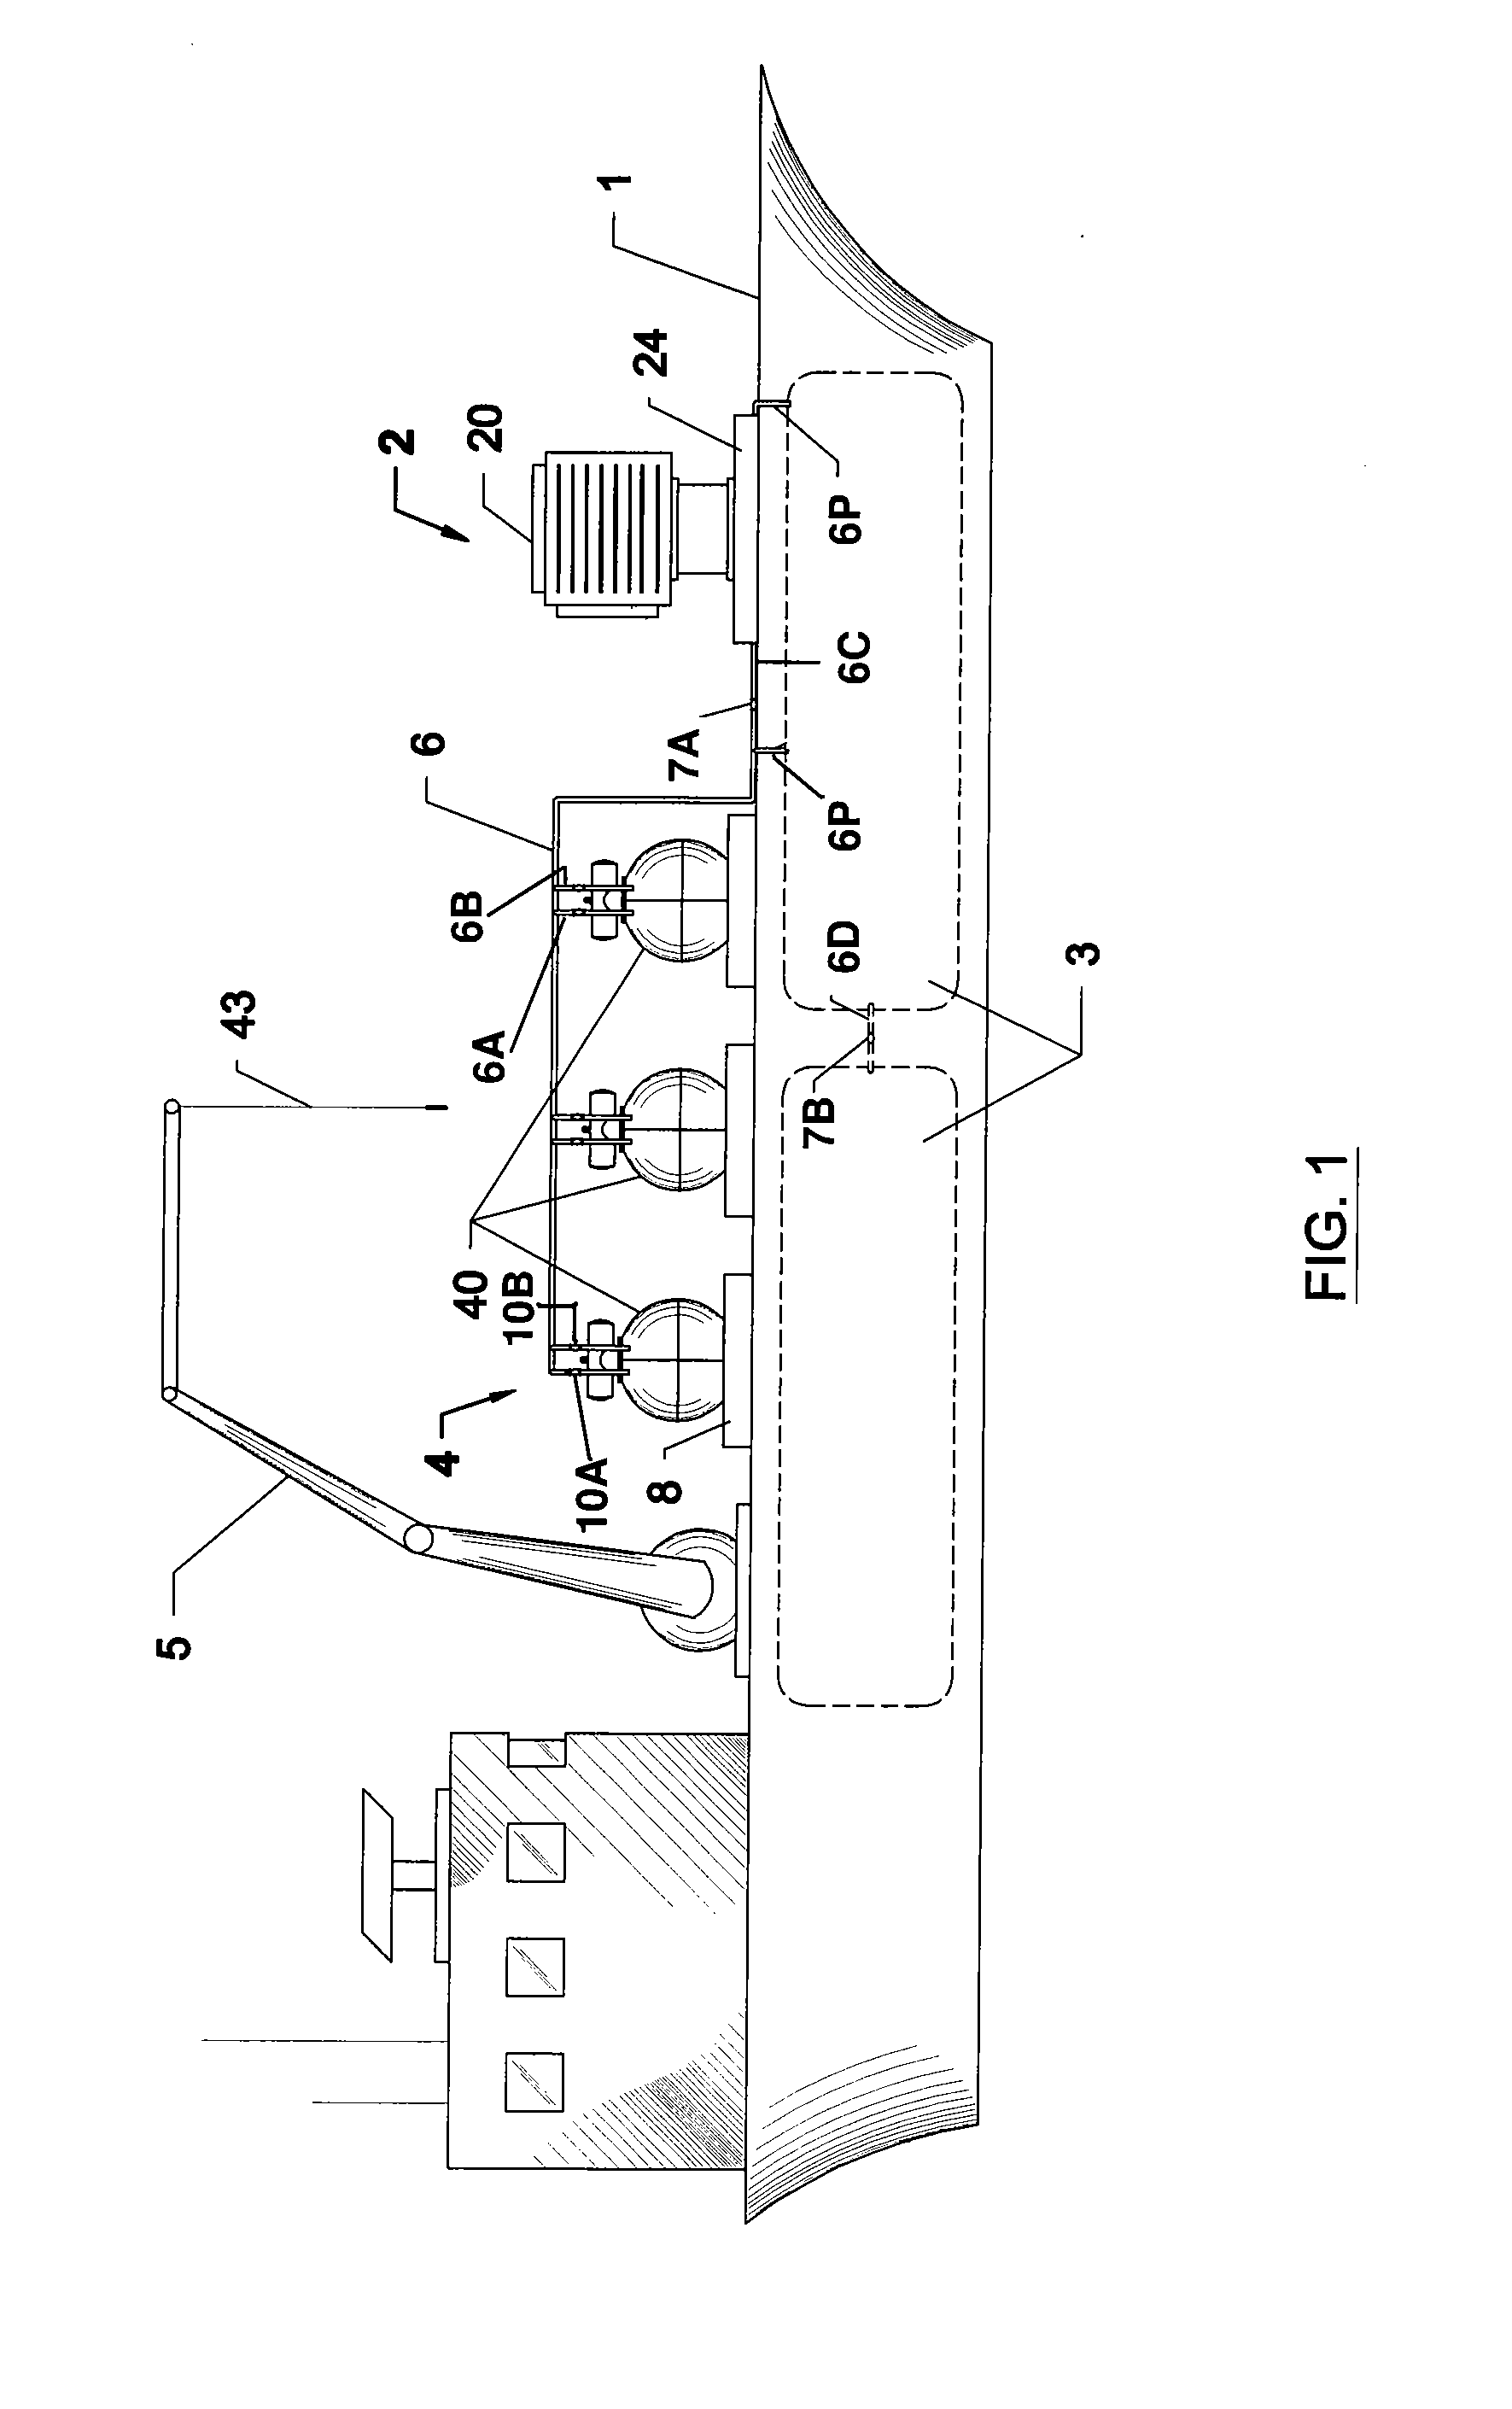 Method, apparatus, and processes for producing potable water utilizing reverse osmosis at ocean depth in combination with shipboard moisture dehumidification